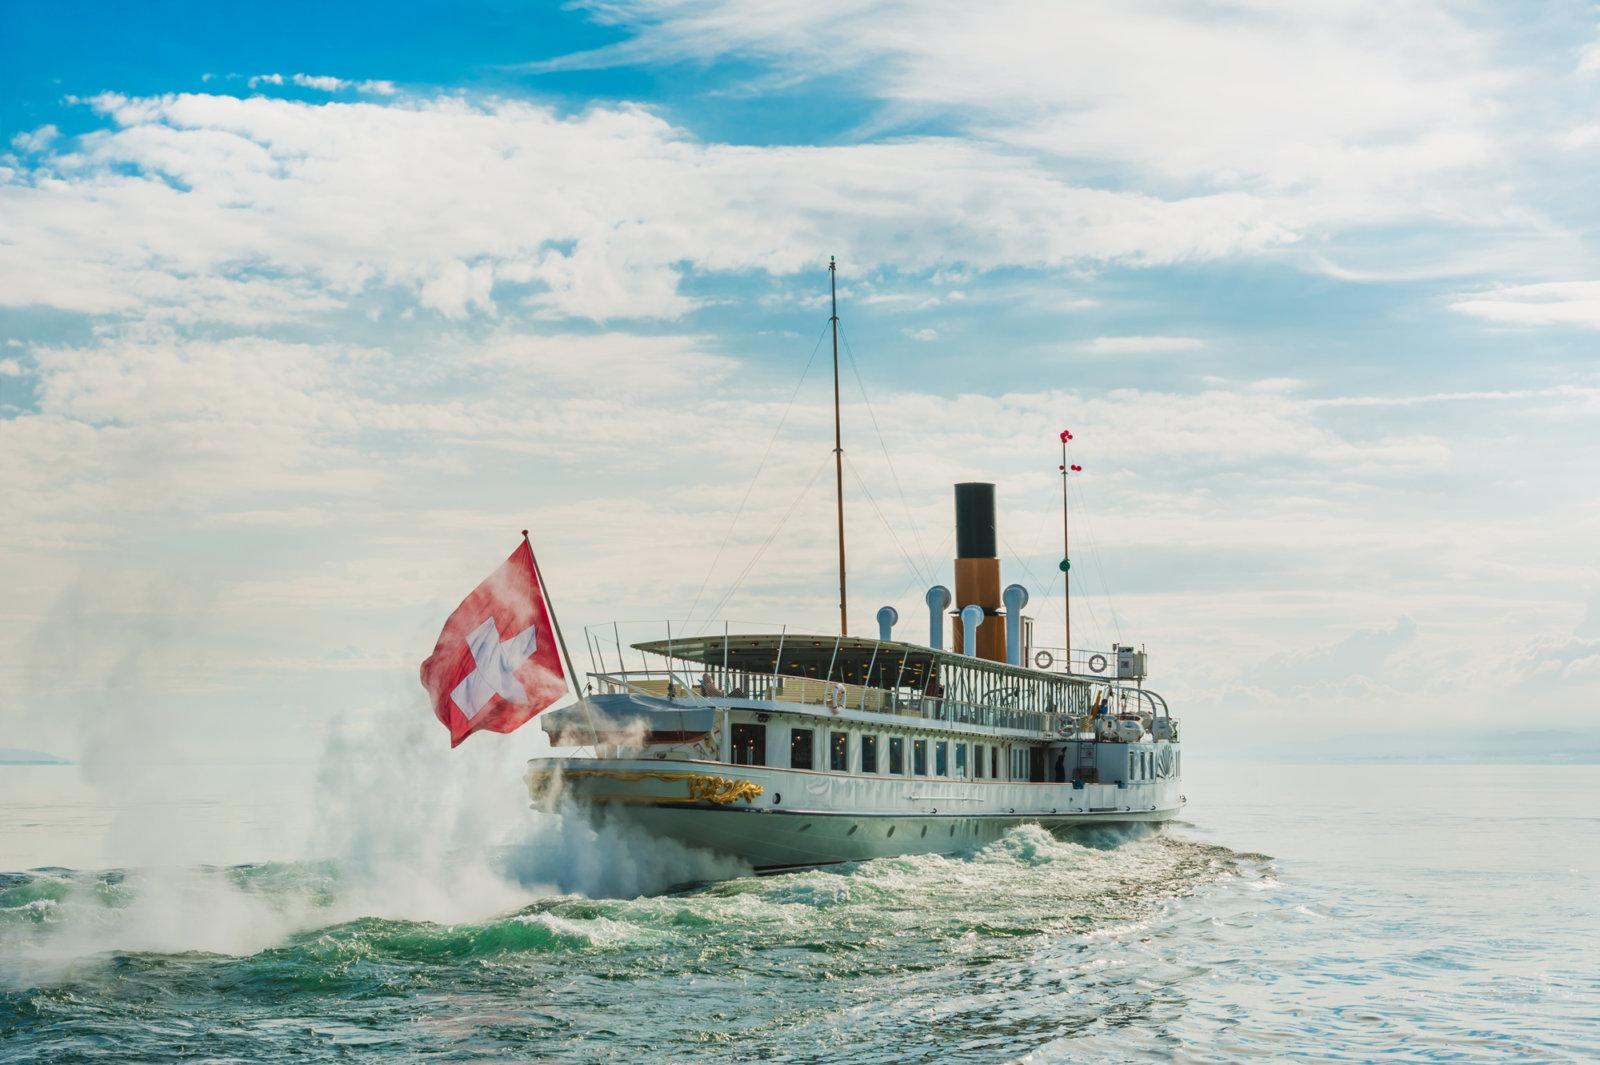 Benefits of the Swiss Travel Pass include Lake Geneva Steamboat Rides